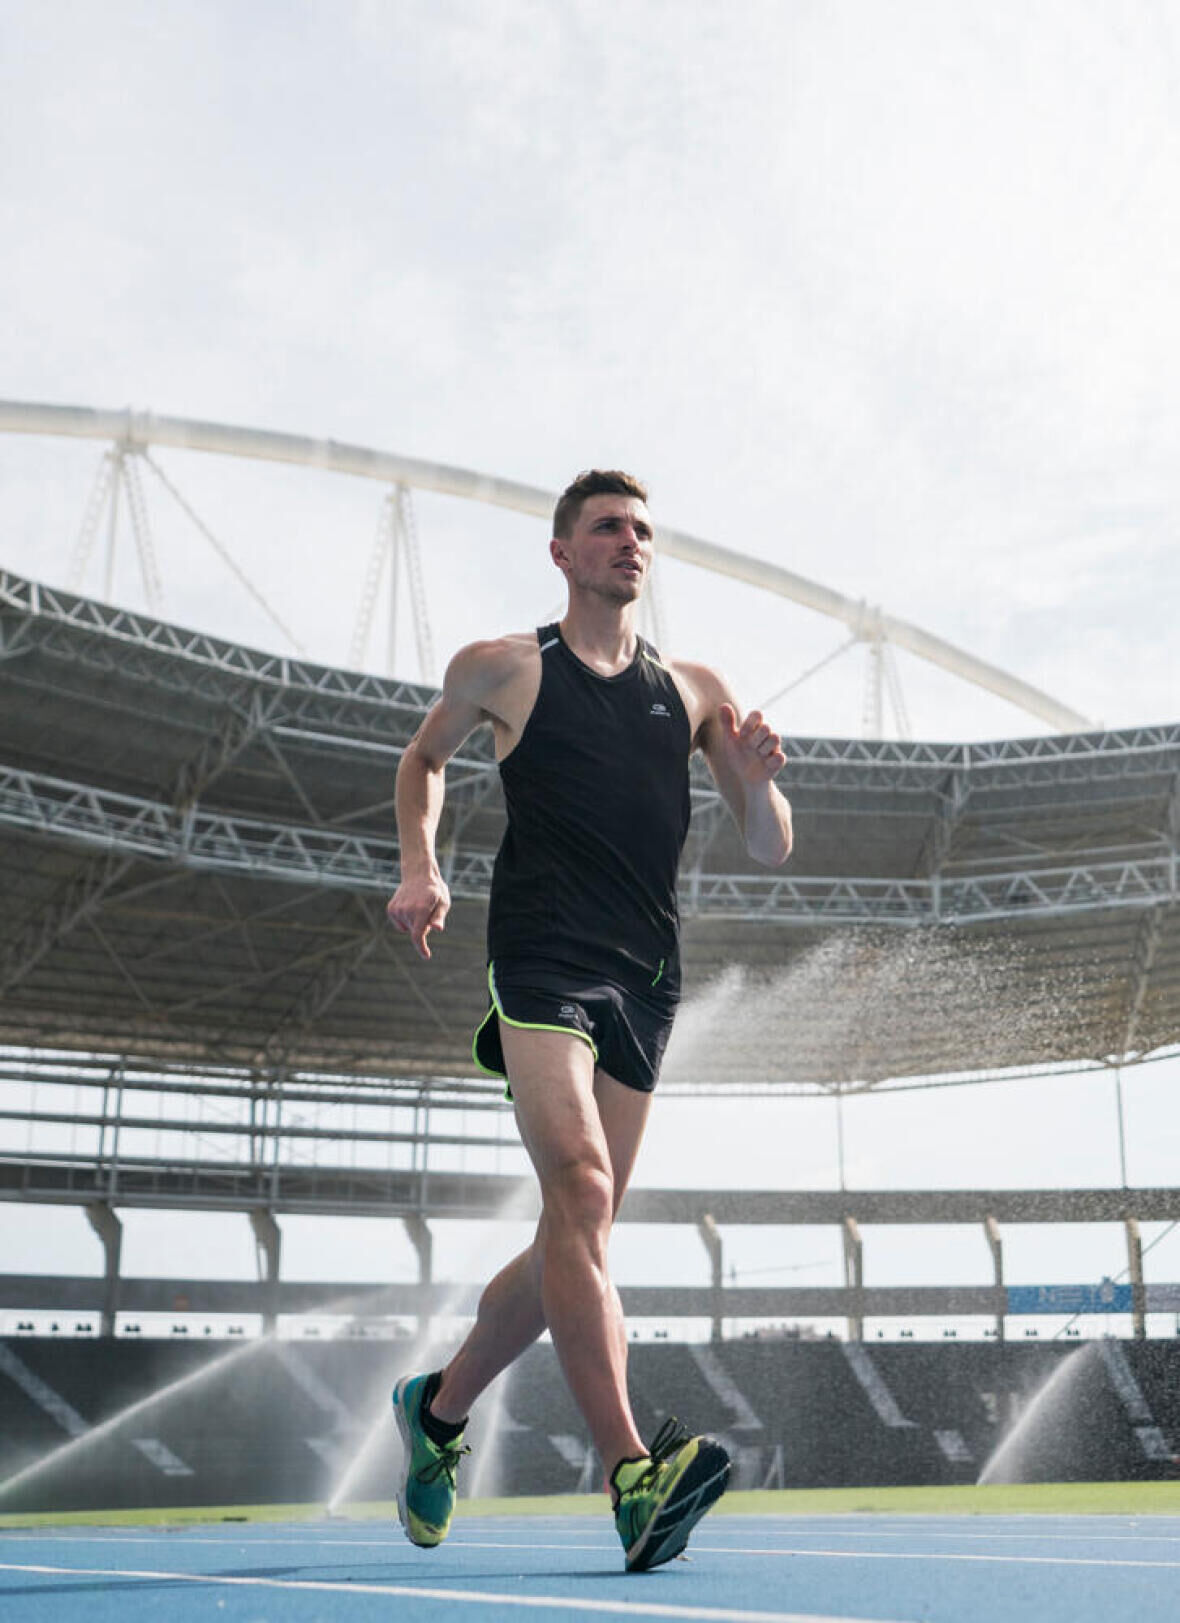 Using interval training to slash your race walking PBs